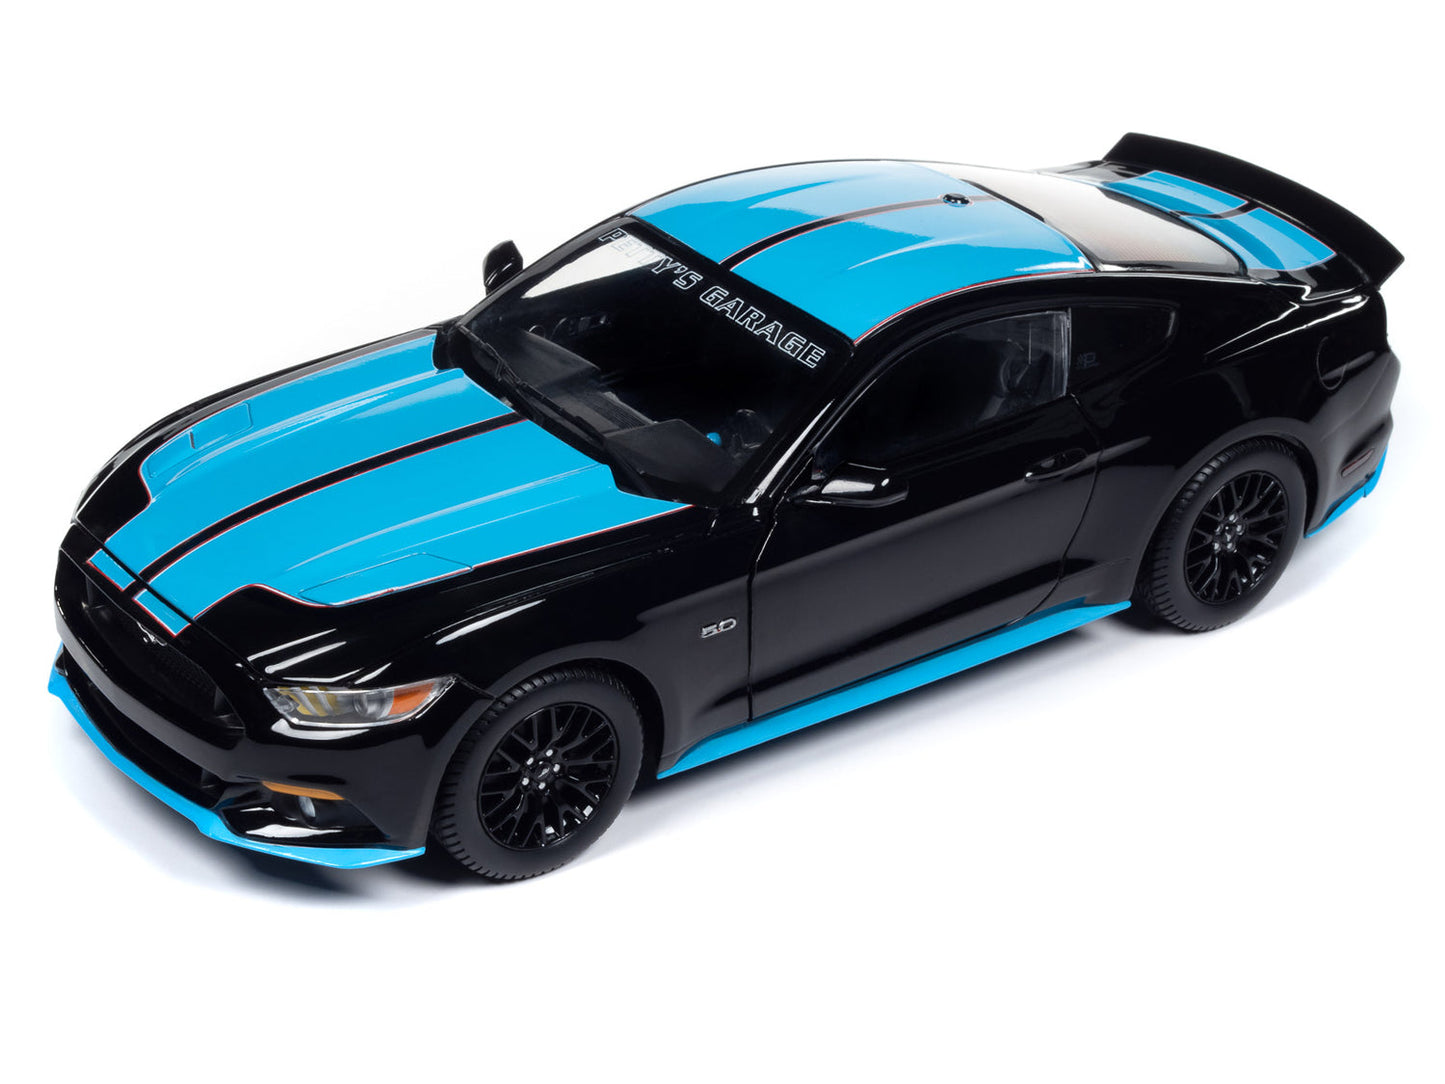 Auto World 321 1:18 Petty's Garage 2016 Ford Mustang Sports Car Diecast Model